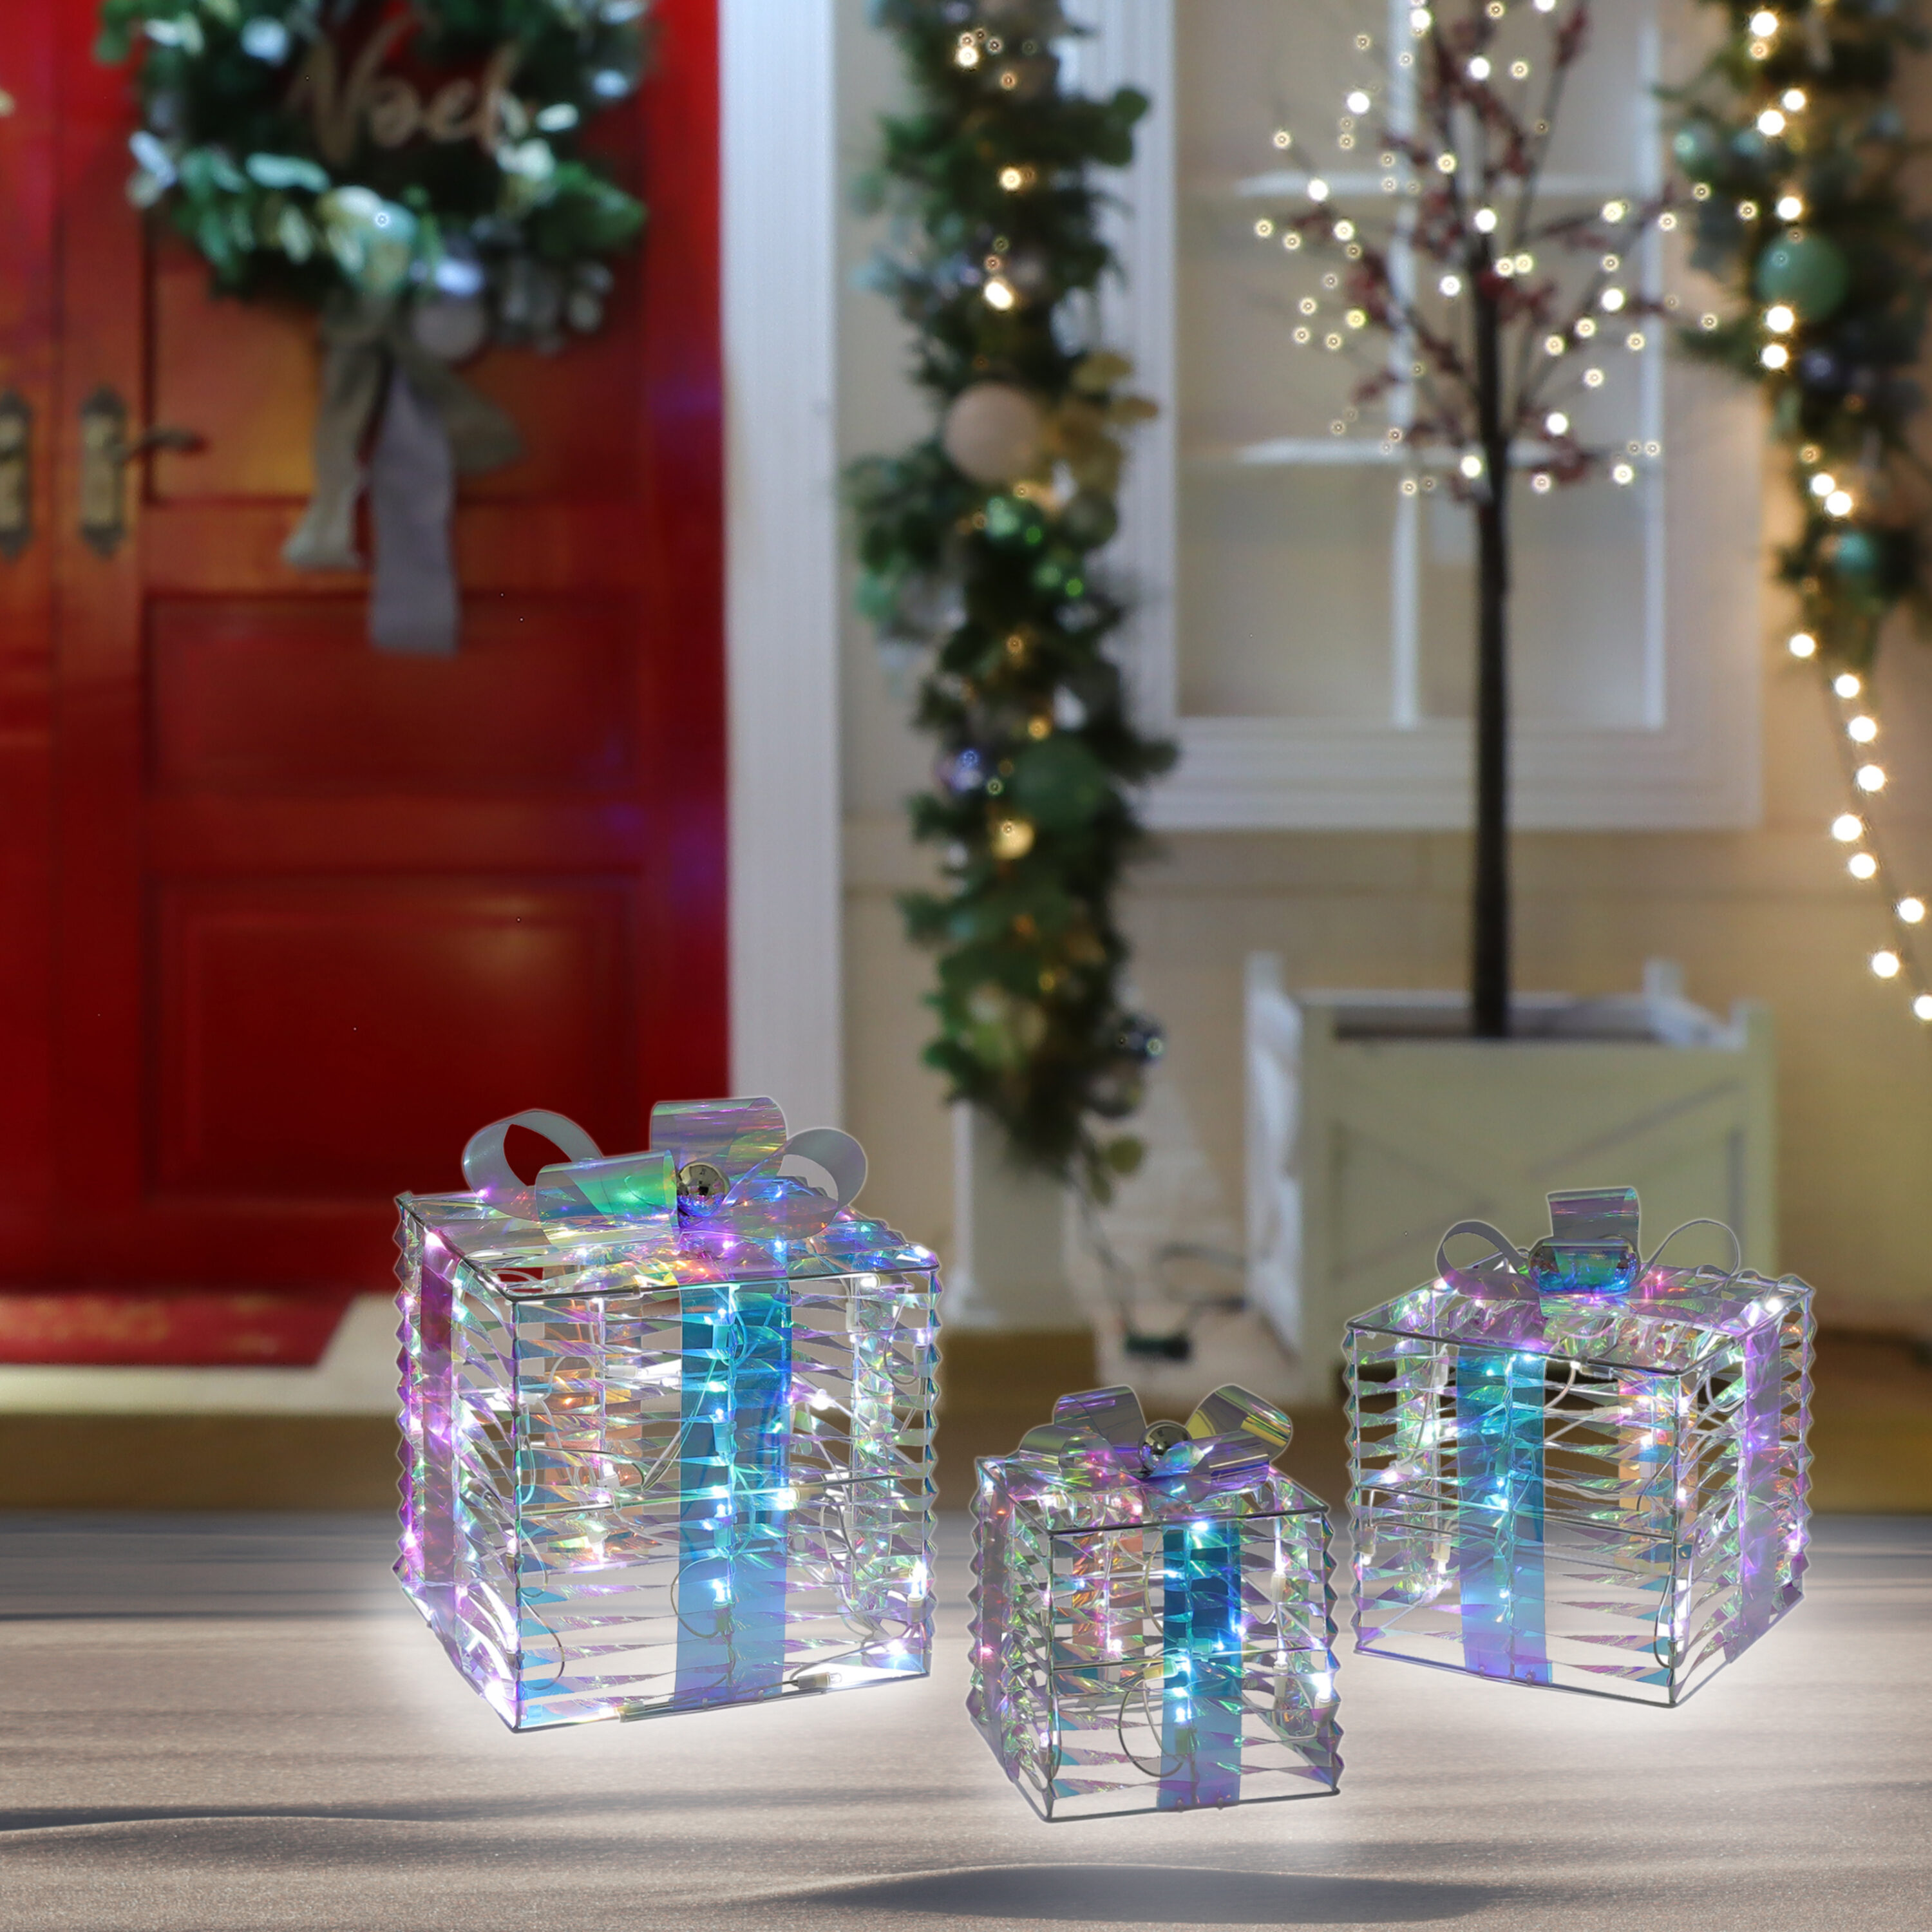 Set of 3 Christmas Lighted Gift Boxes 100 LED Transparent Lighted